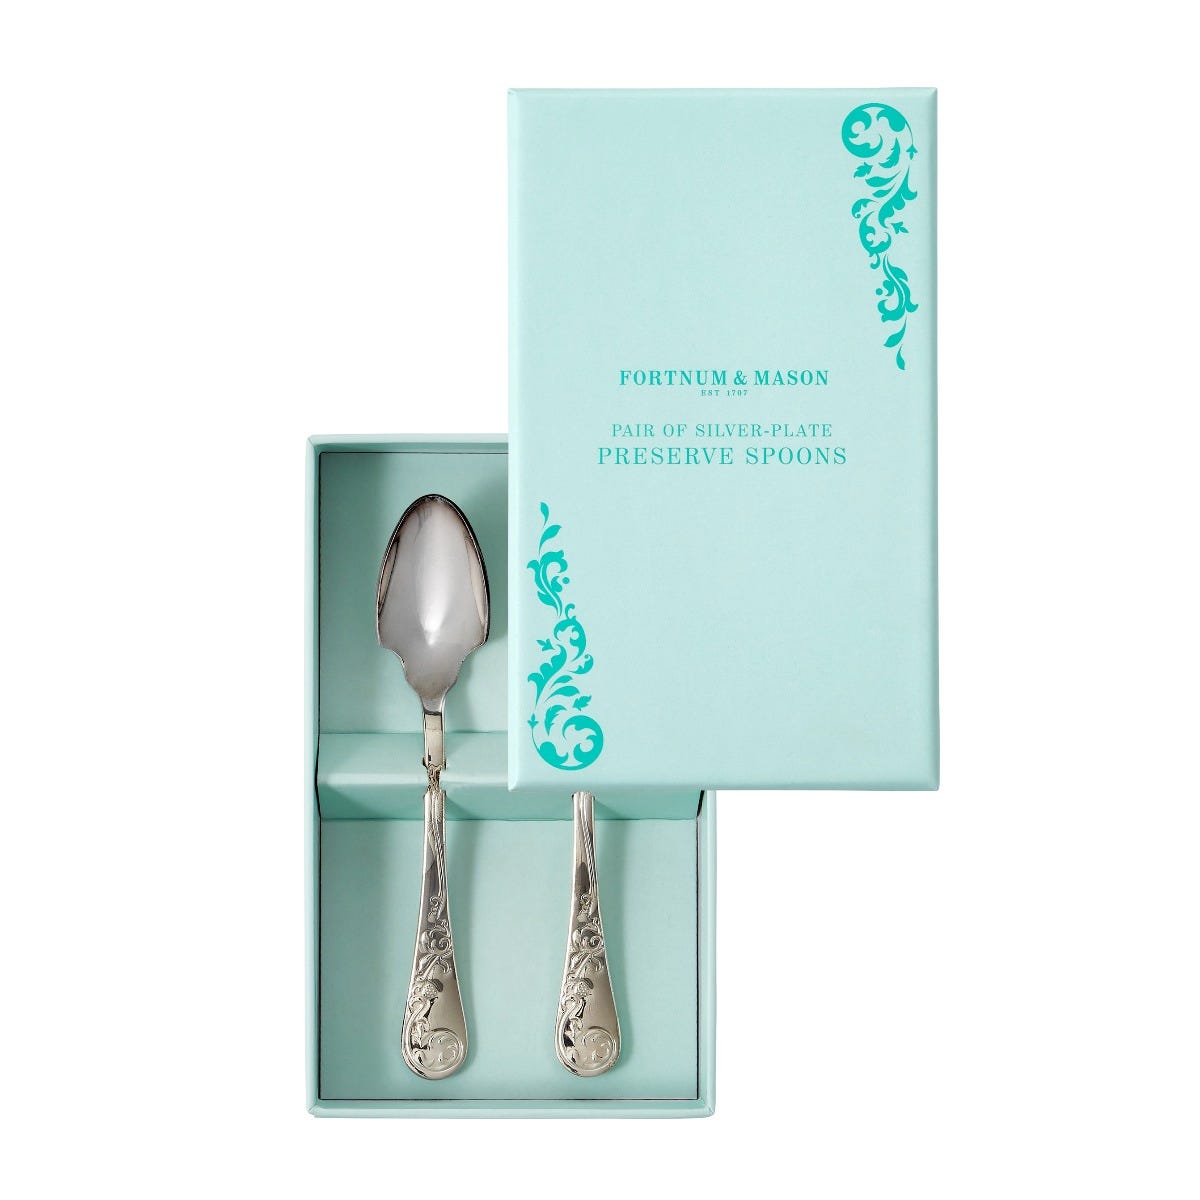 Silver-Plated Preserve Spoons, Set of 2, Fortnum & Mason